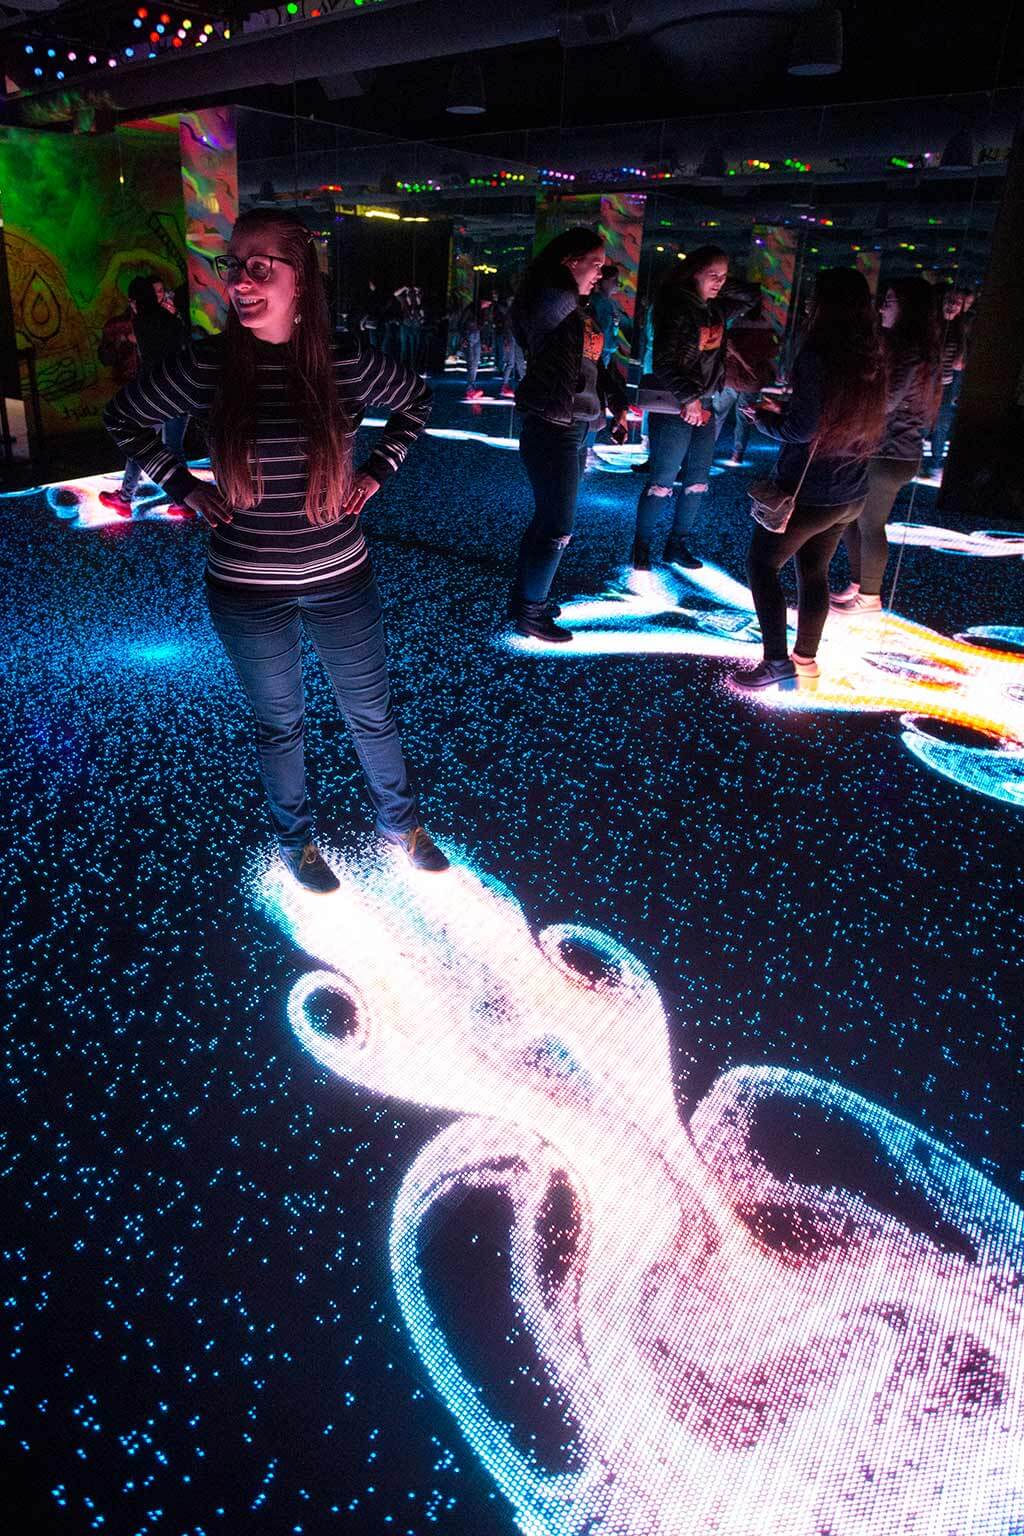 drive-swim-fly-chicago-illinois-wndr-museum-selfie-experience-family-fun-light-up-floor-psychedelic-jessica-wndr-light-floor